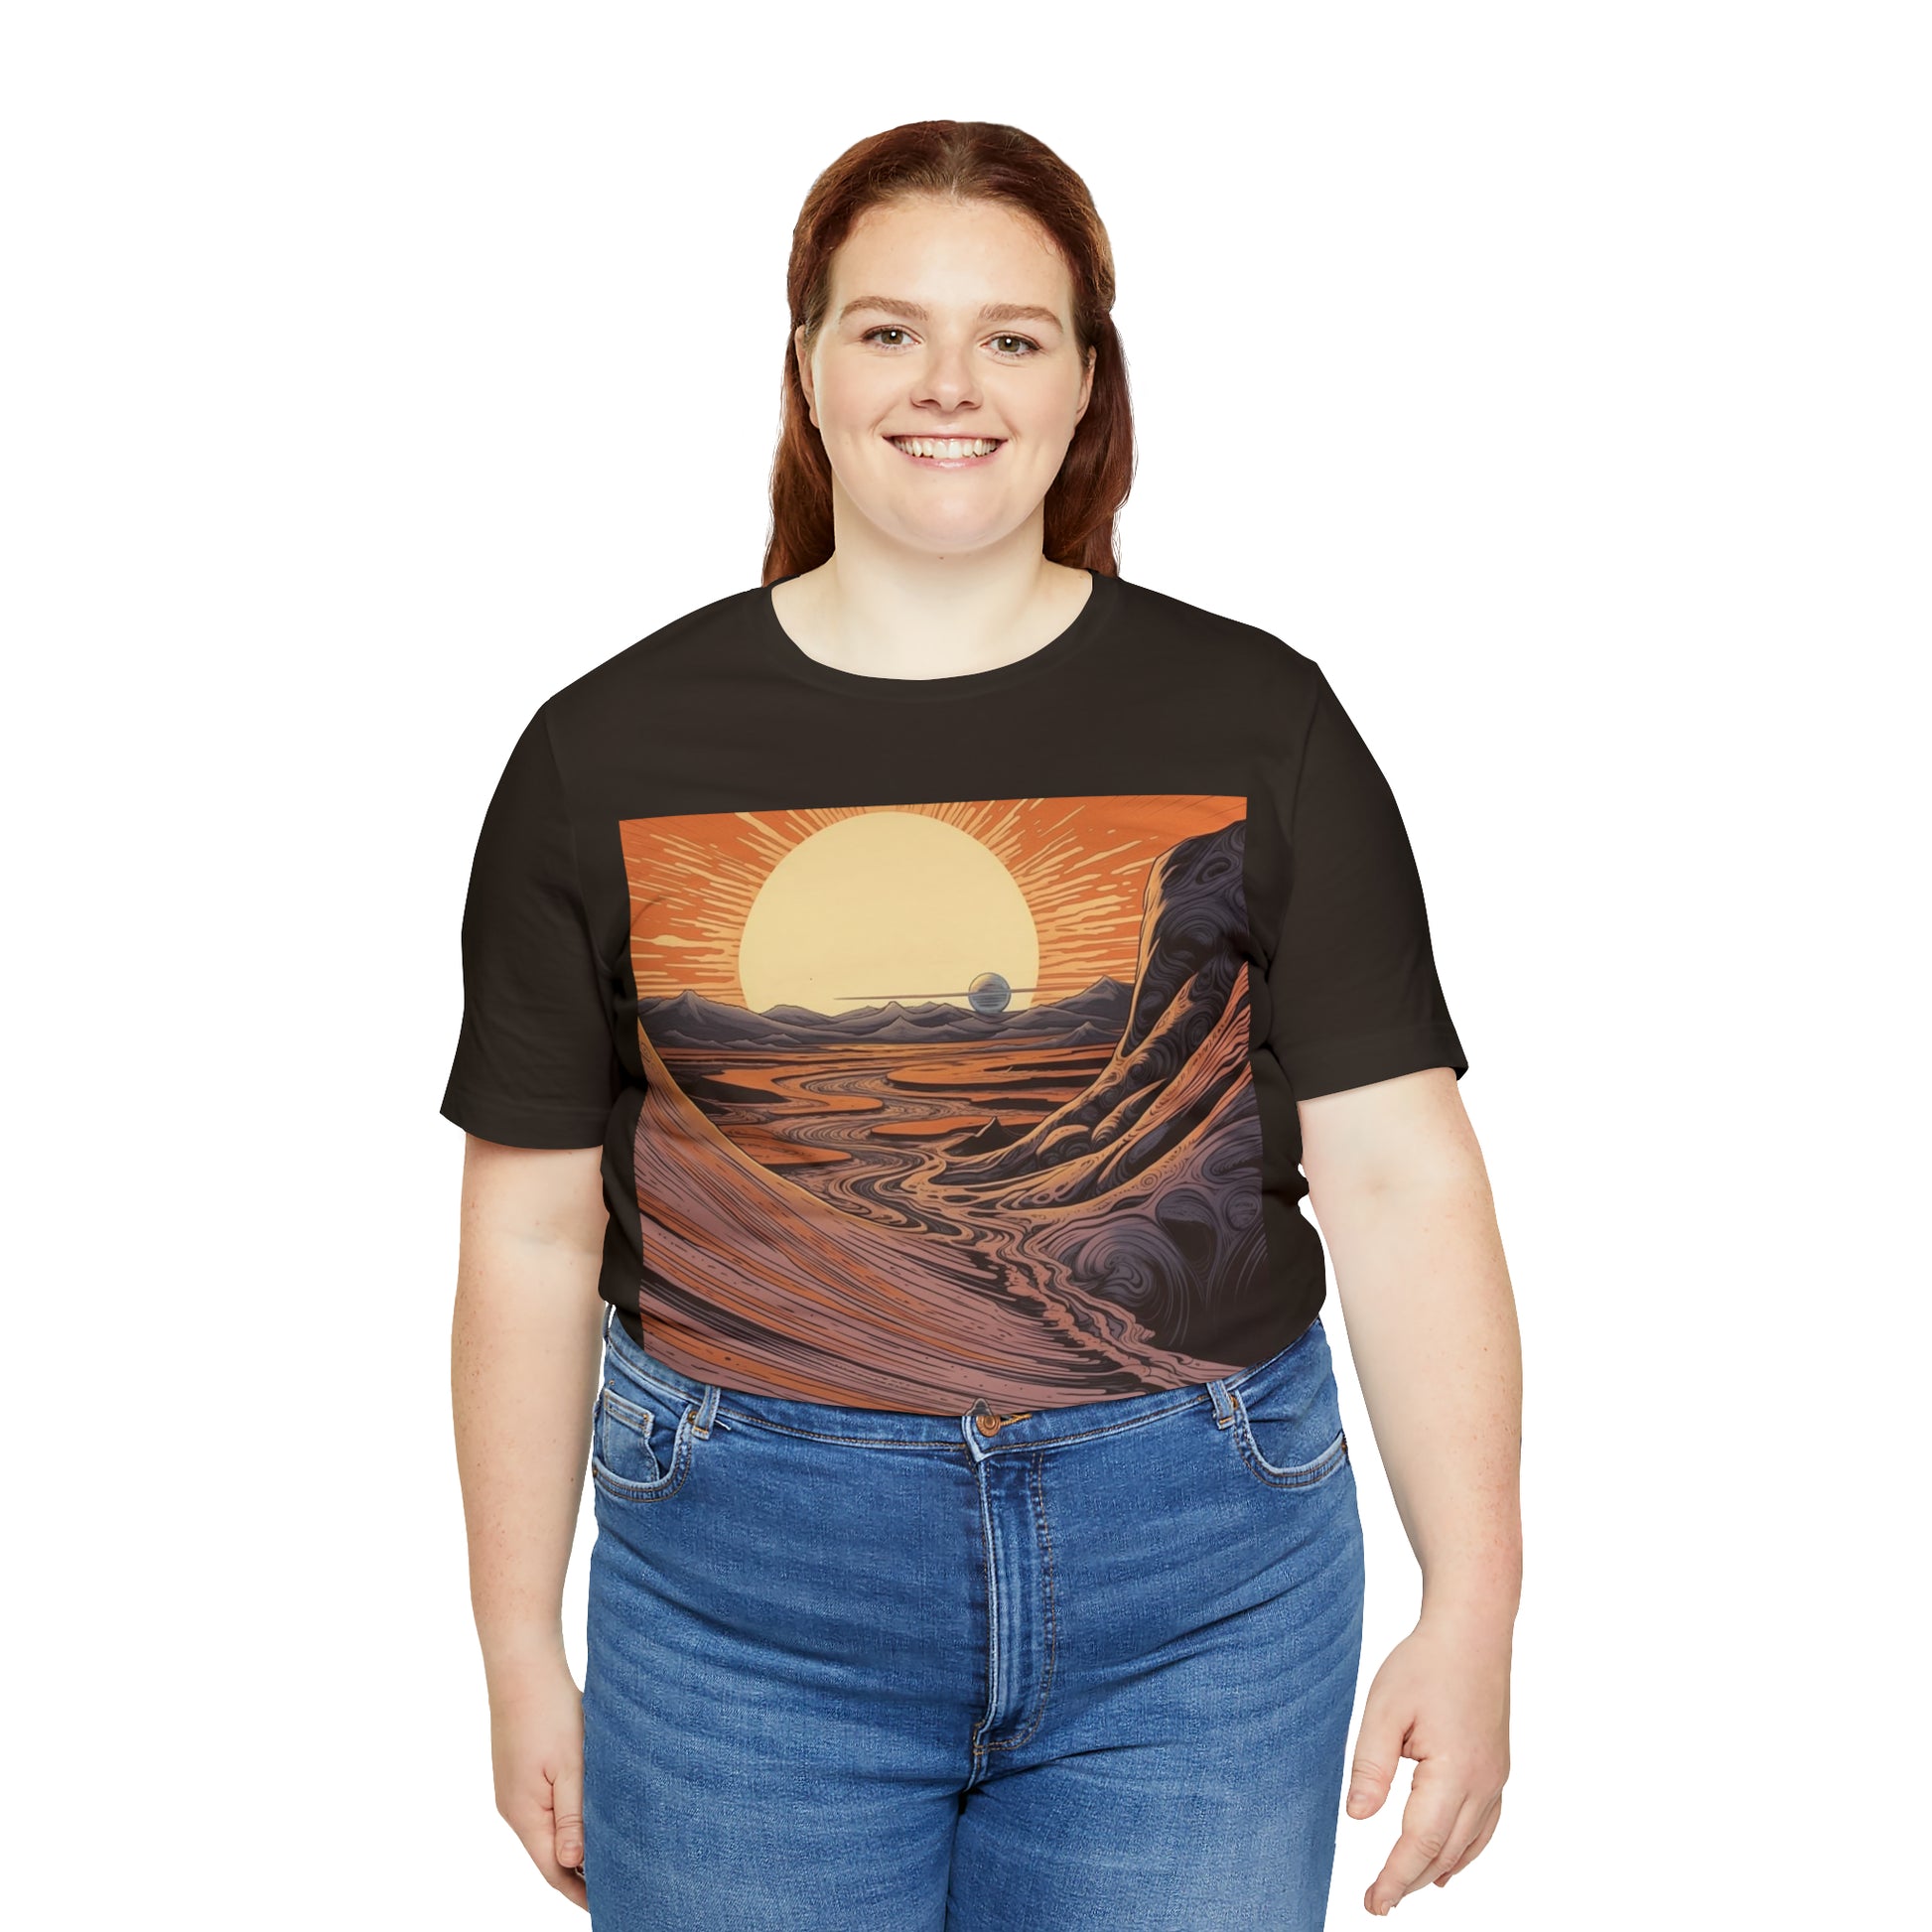 brown-quest-thread-tee-shirt-with-large-sunrise-over-dunes-on-center-of-shirt